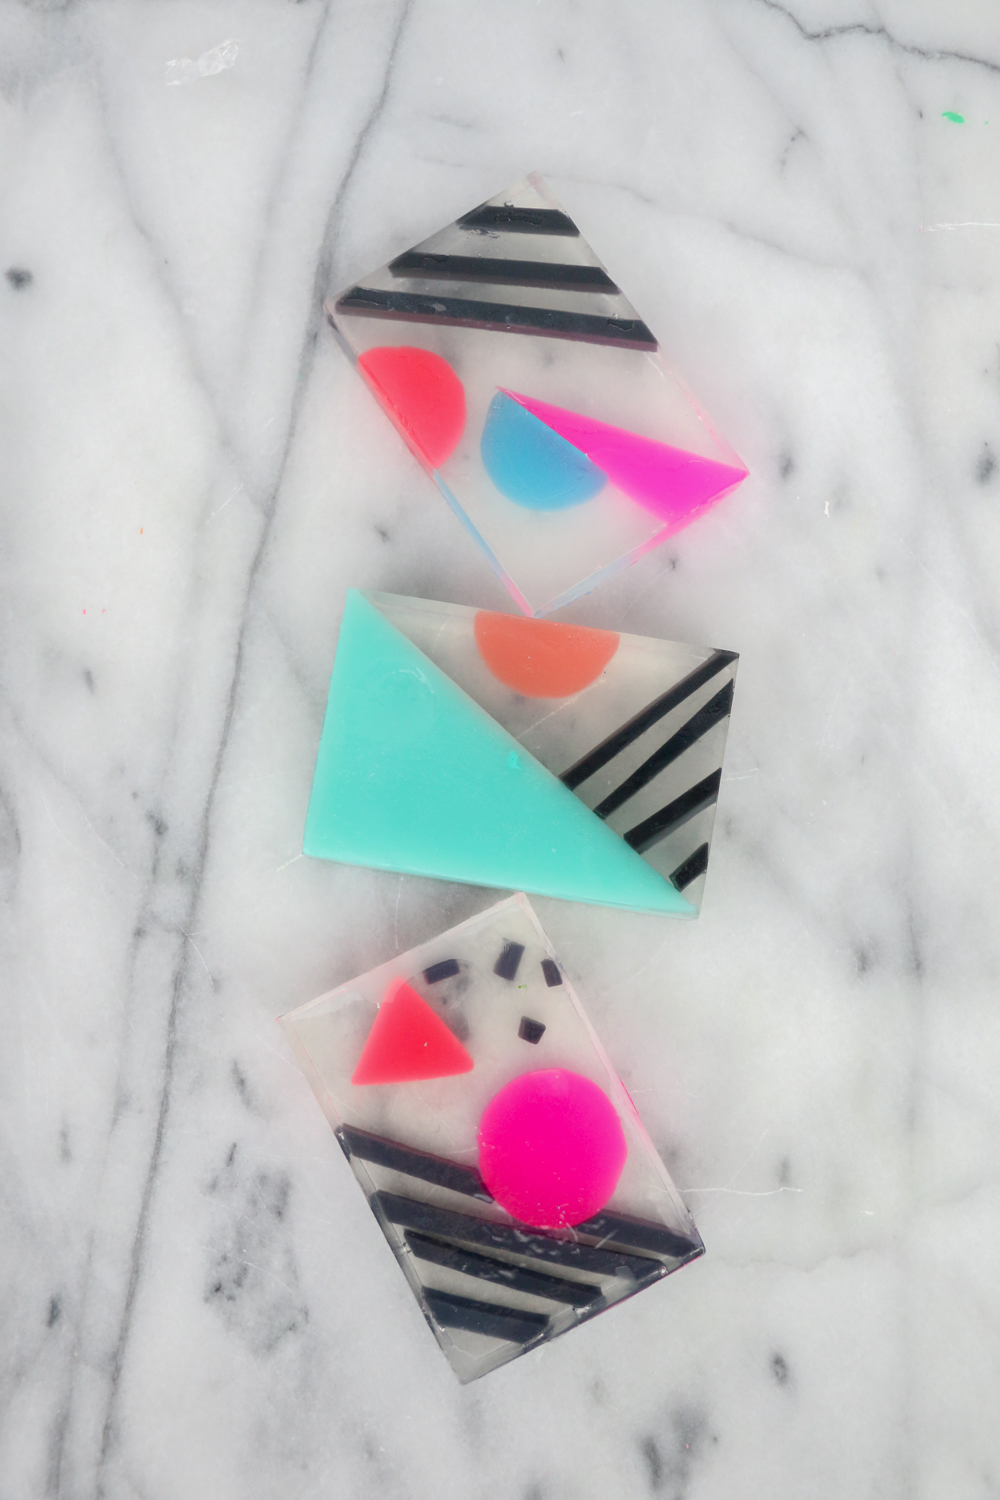 How to Make 80's Inspired Soap Bars